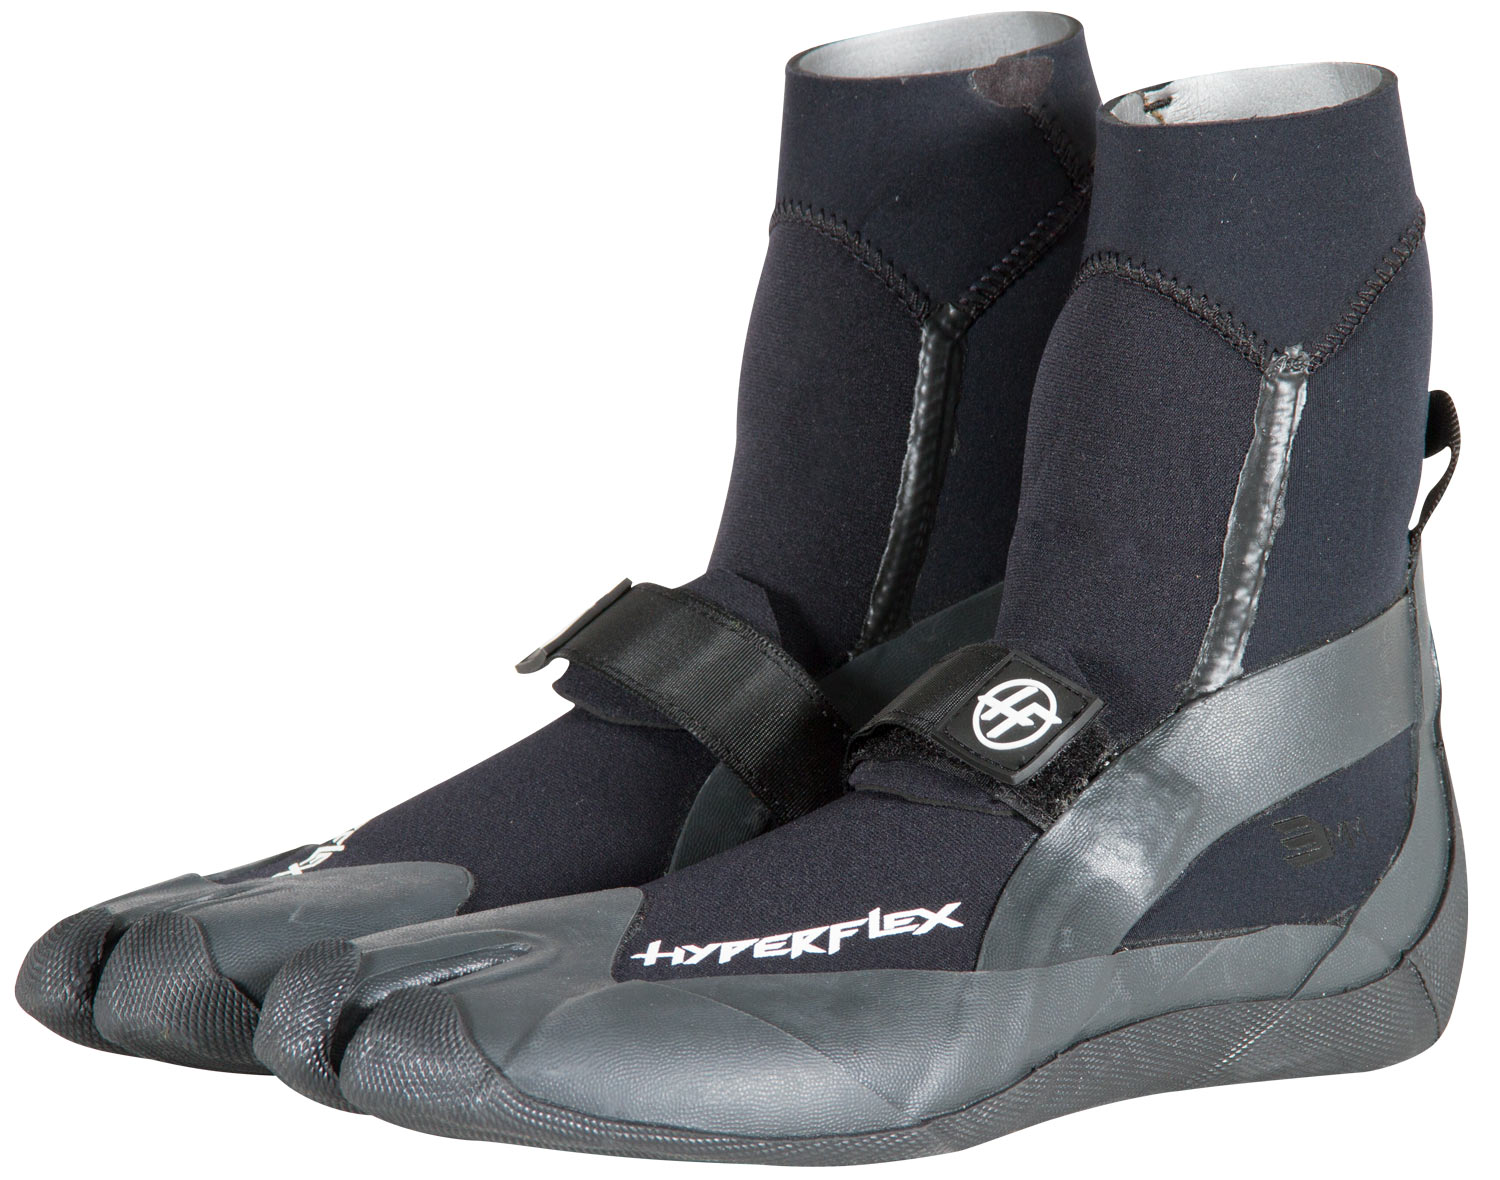 Available in 3MM Feels Like Your Barefoot Hyperflex Pro Series Round Toe Surfing Boots Keep Warm 5MM or 7MM 